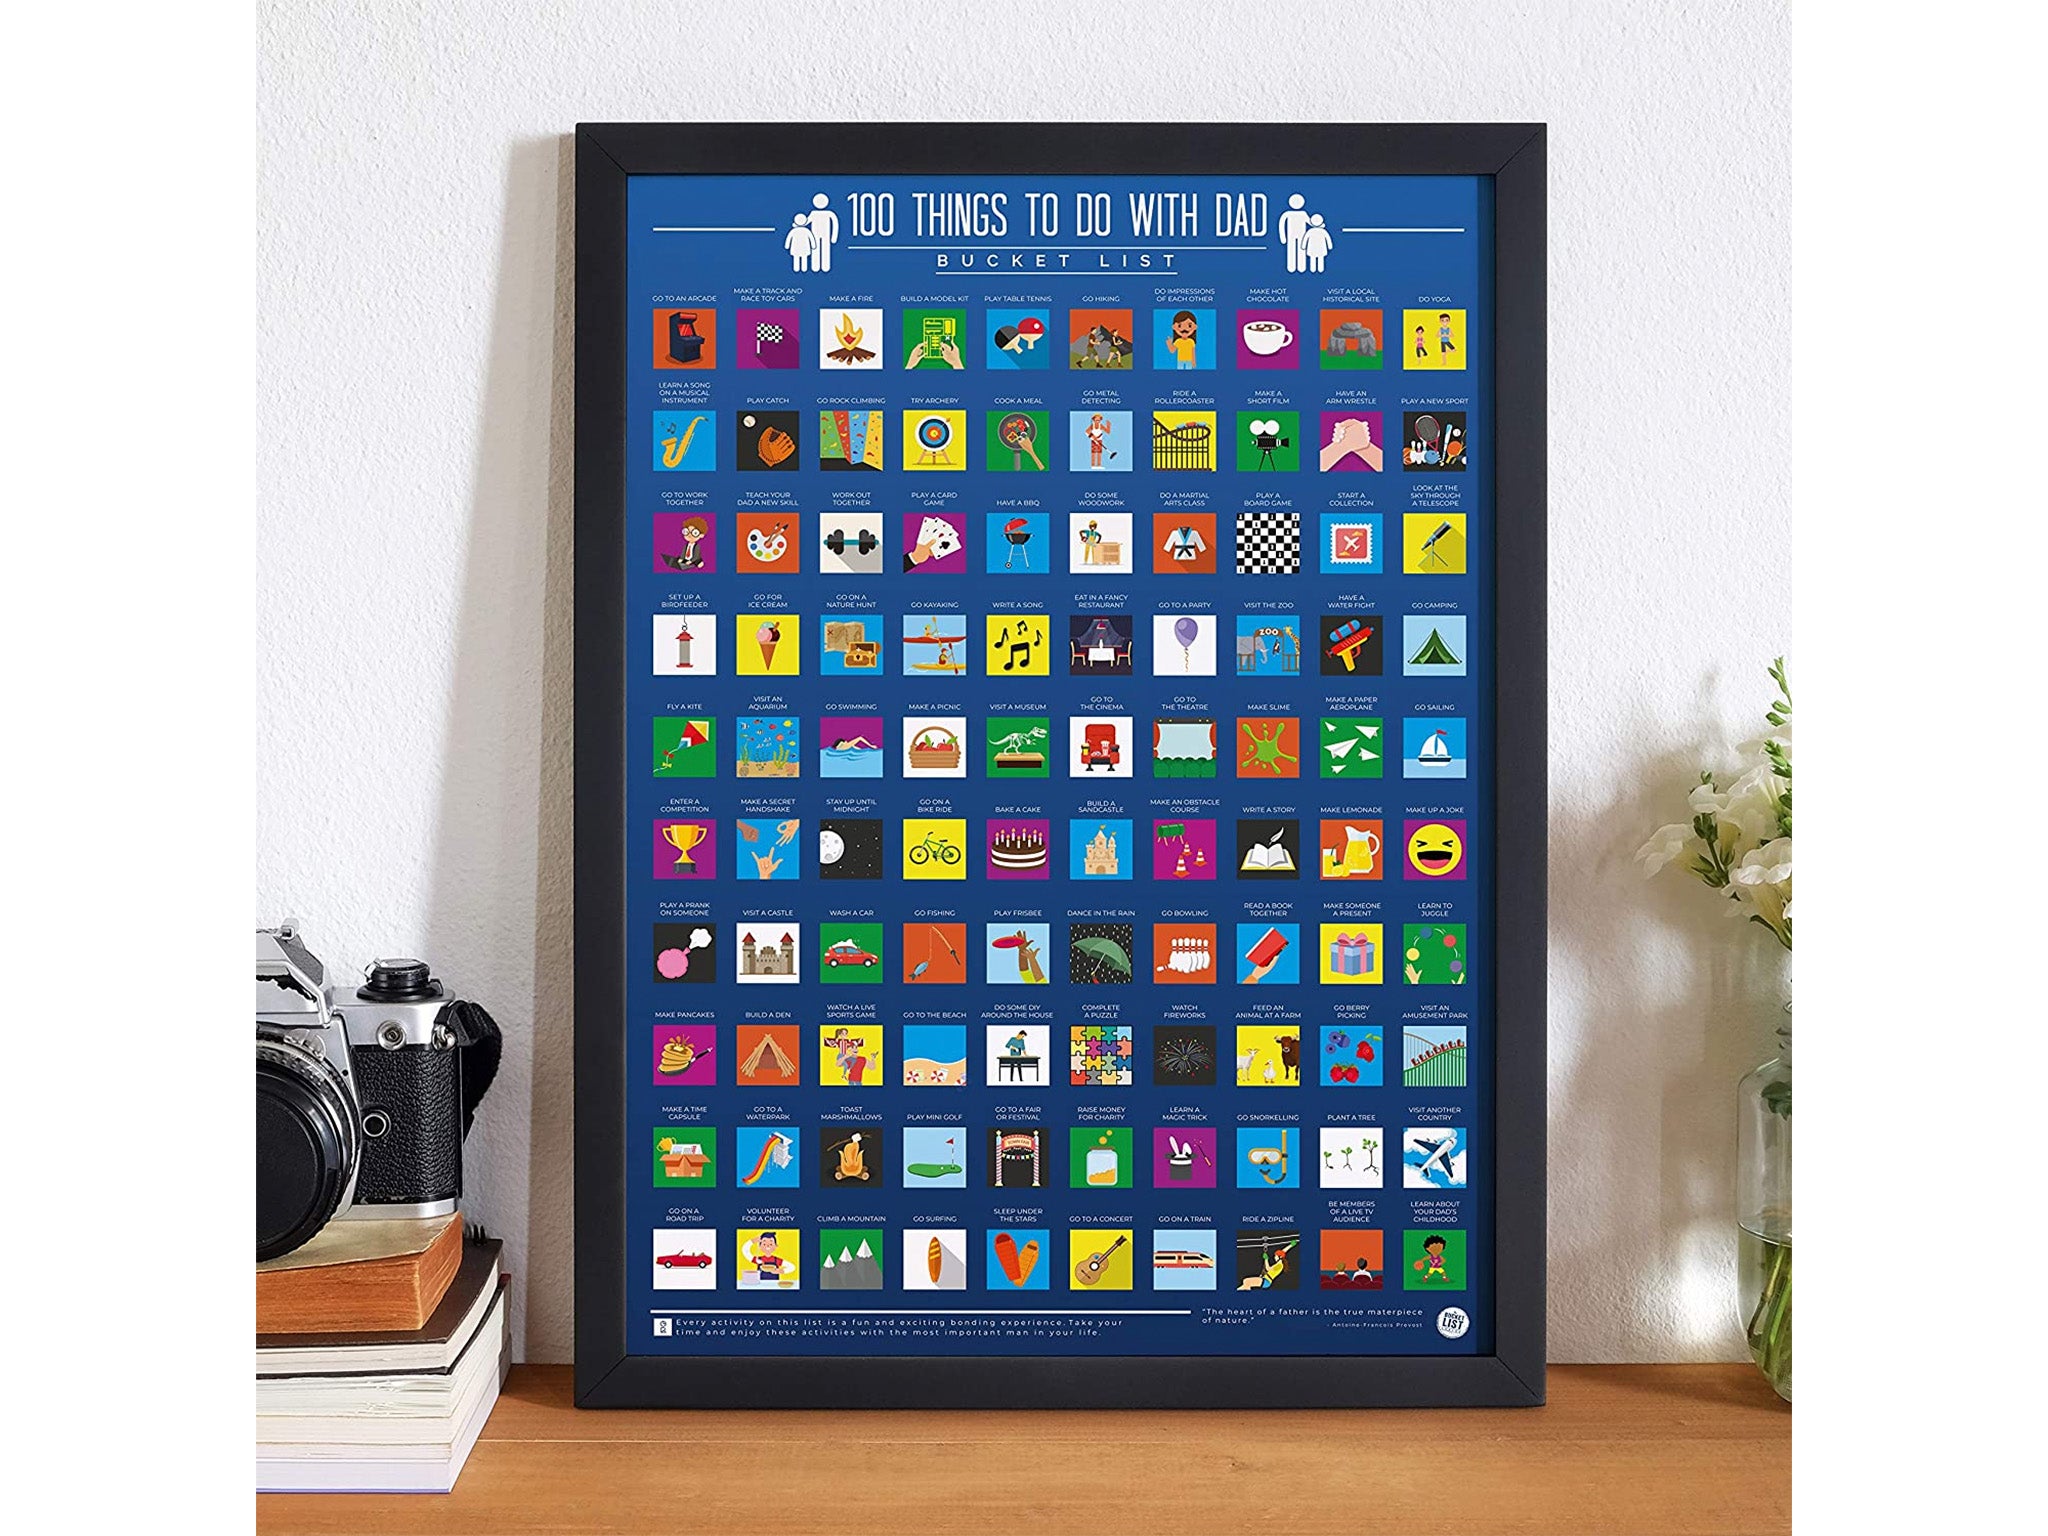 100 Things to do with Dad wallchart